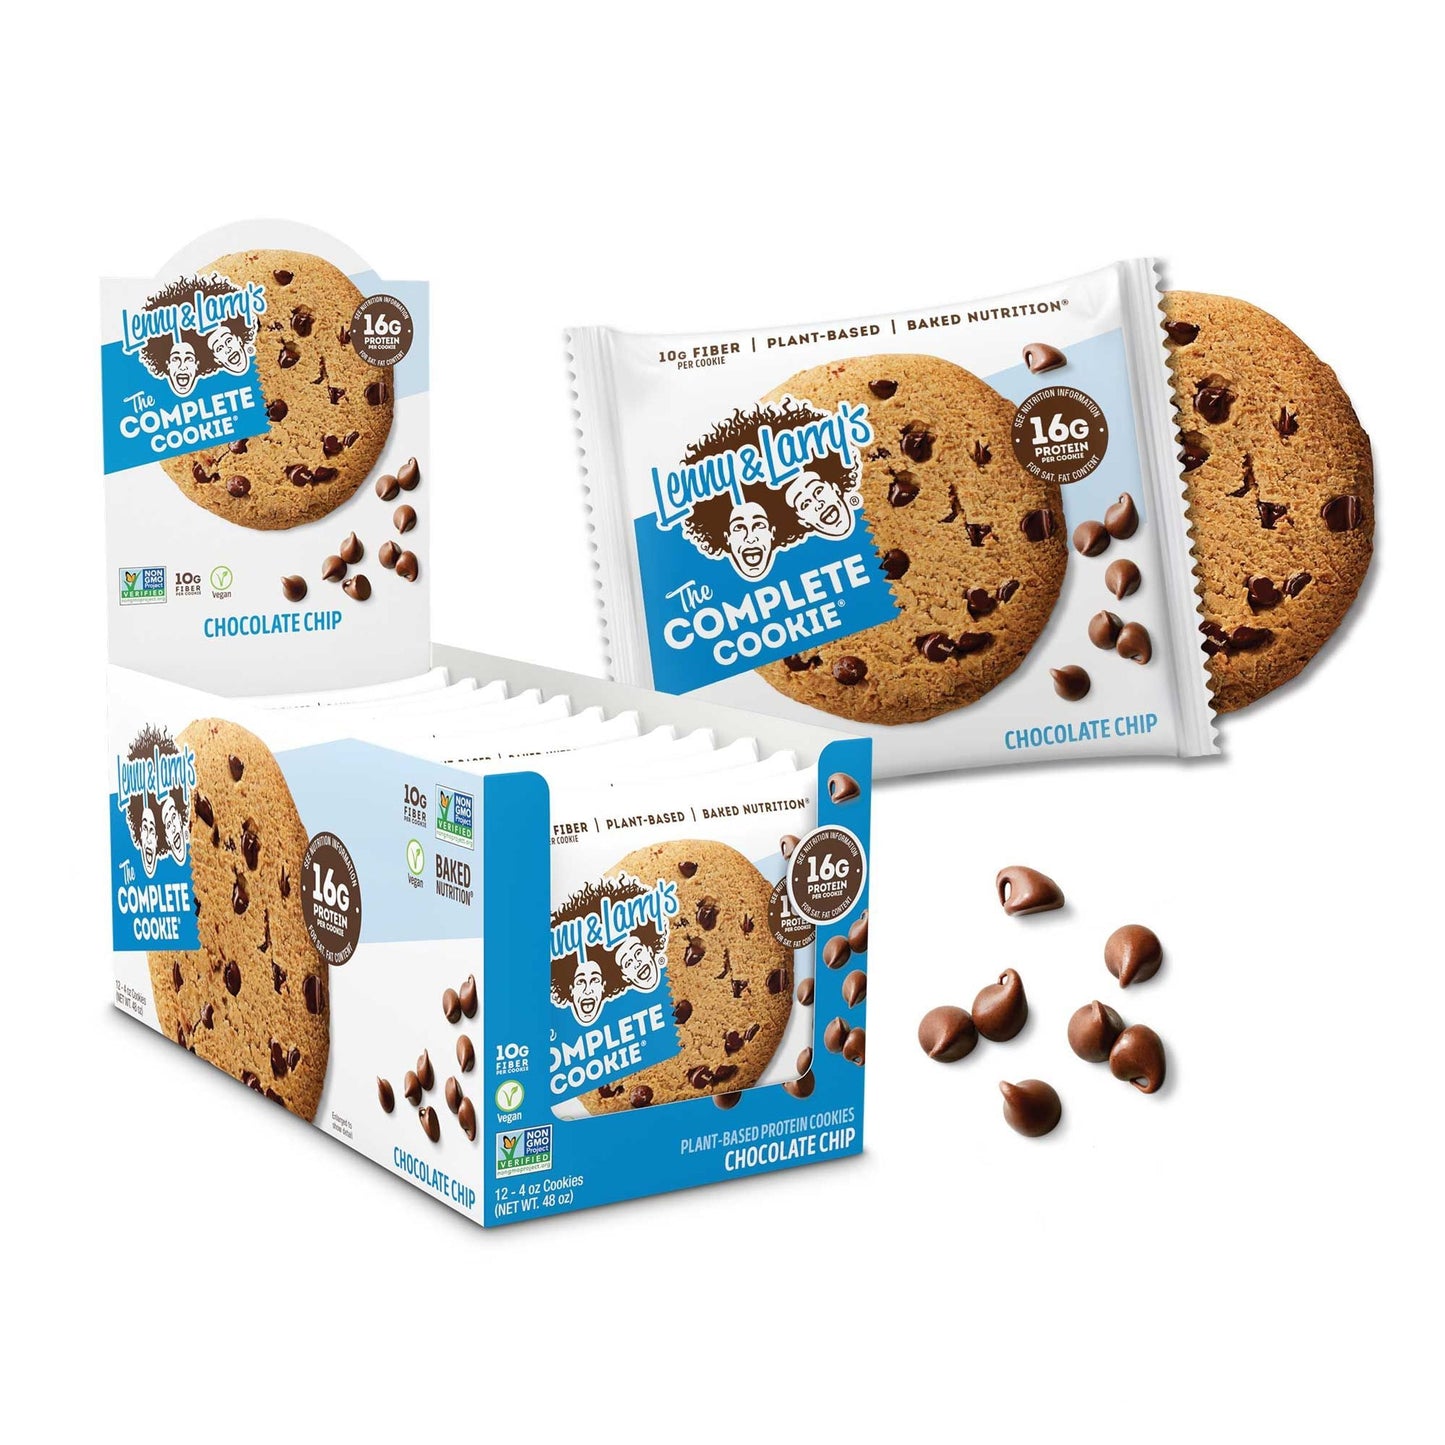 Lenny & Larry's The Complete Cookie, Single Cookie 113g Or A Box Of 12 Cookies, Chocolate Chip Flavour Vegan